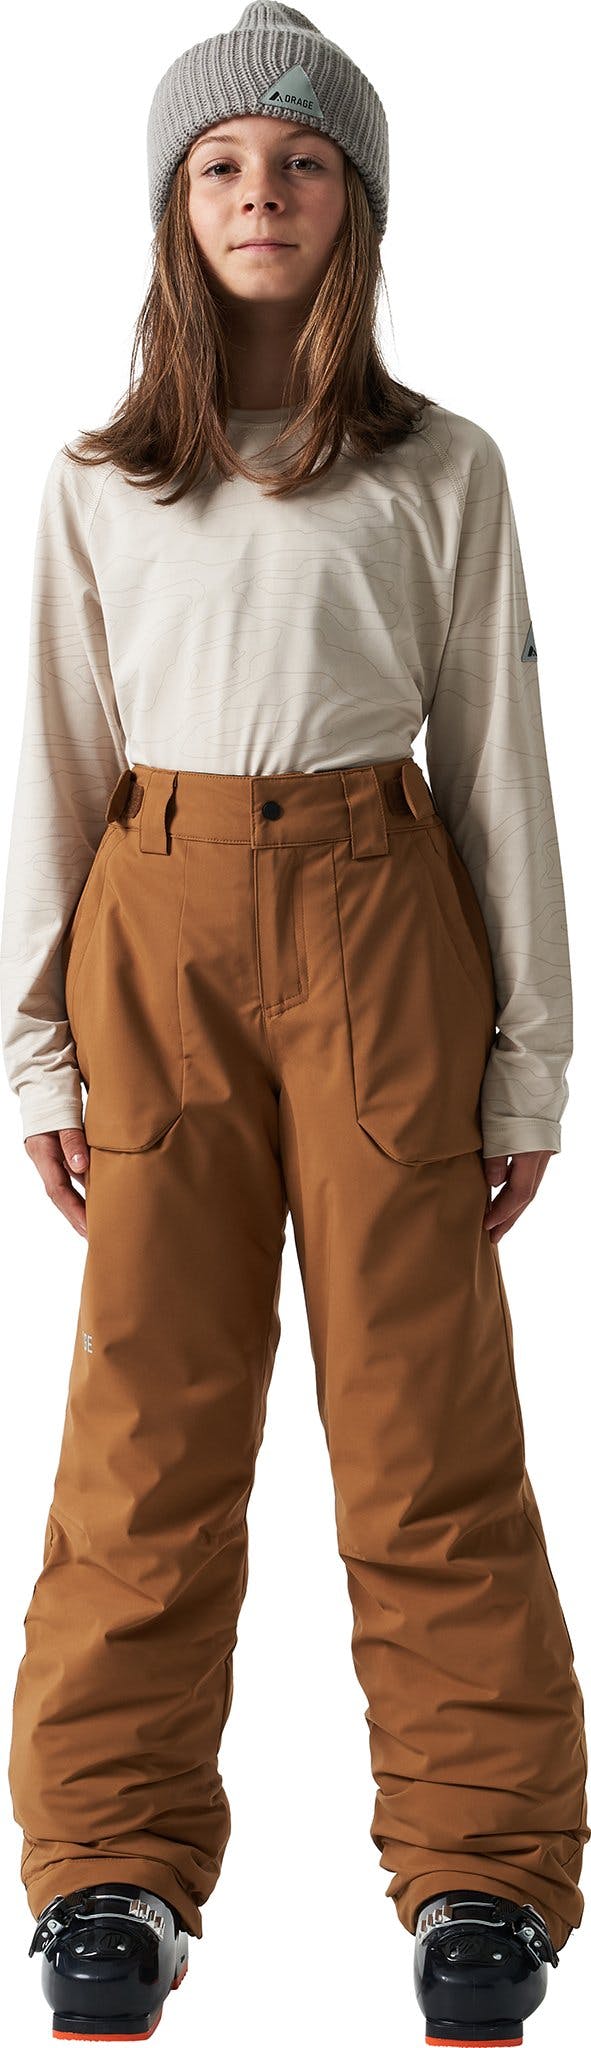 Product image for Comi Insulated Pant - Girls